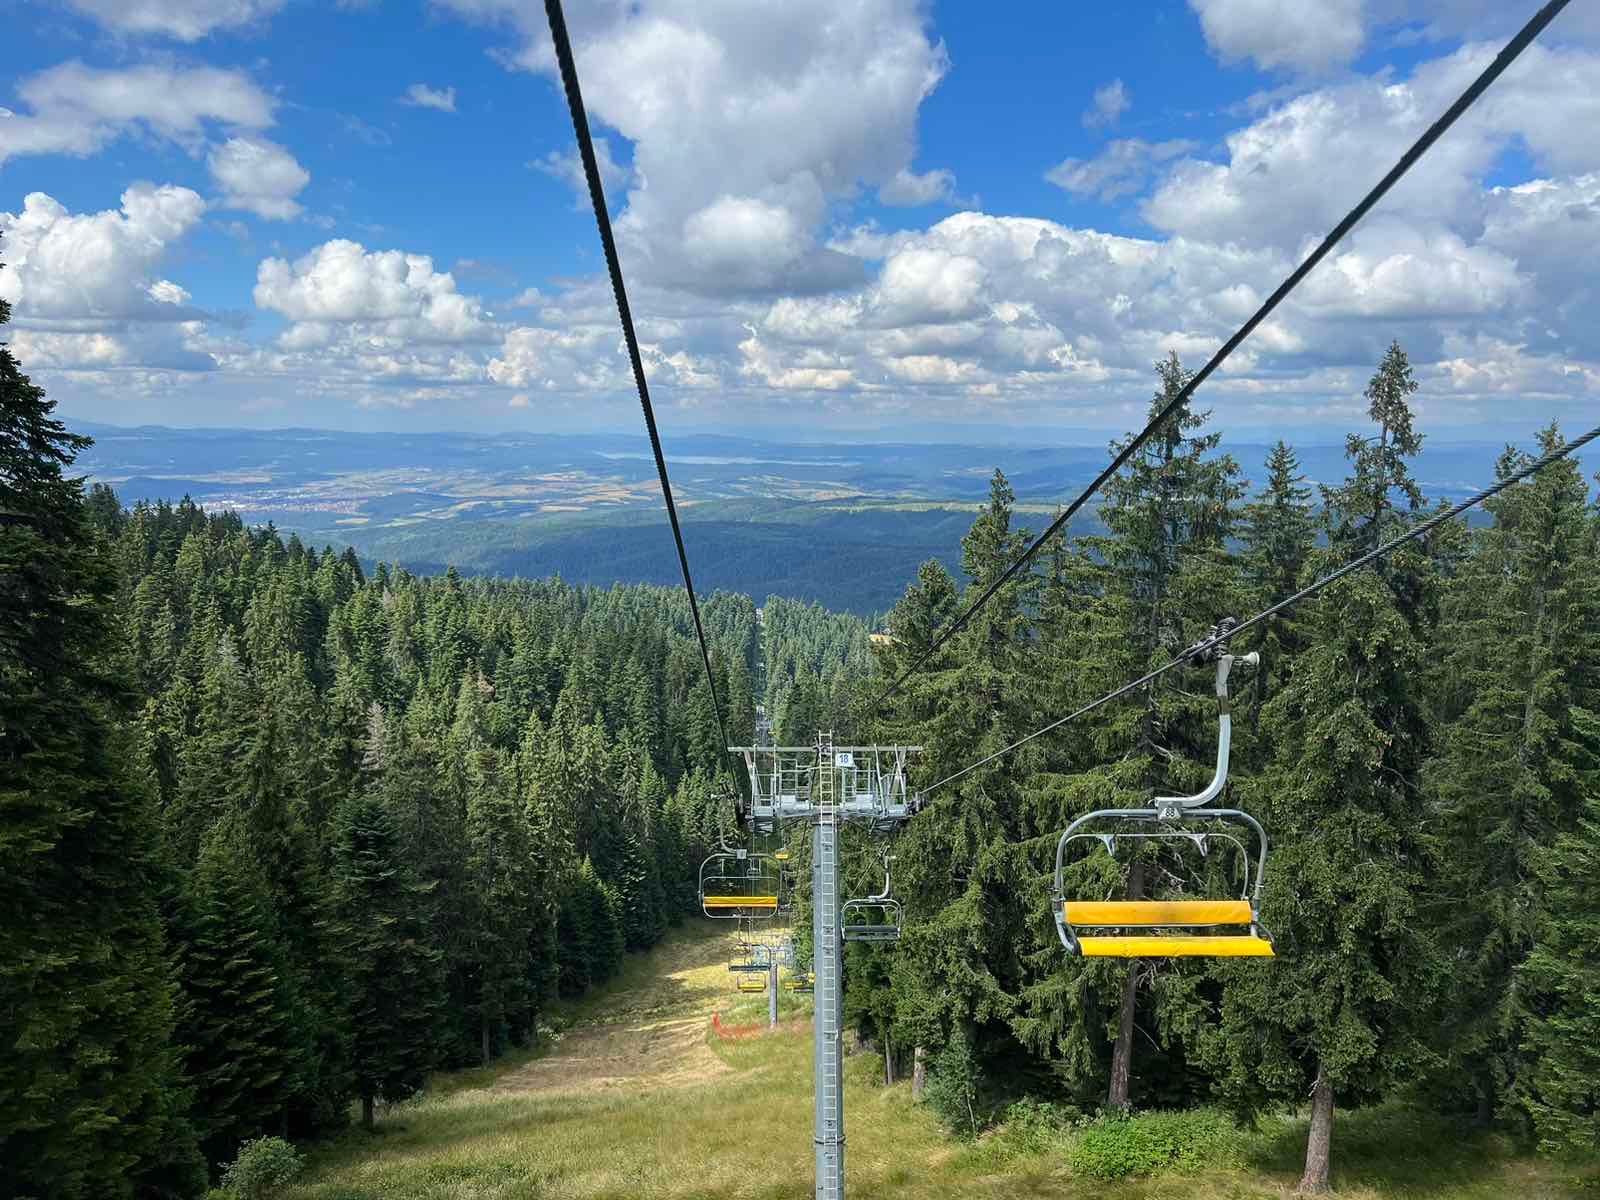 A ski lift is going up a hill surrounded by trees.